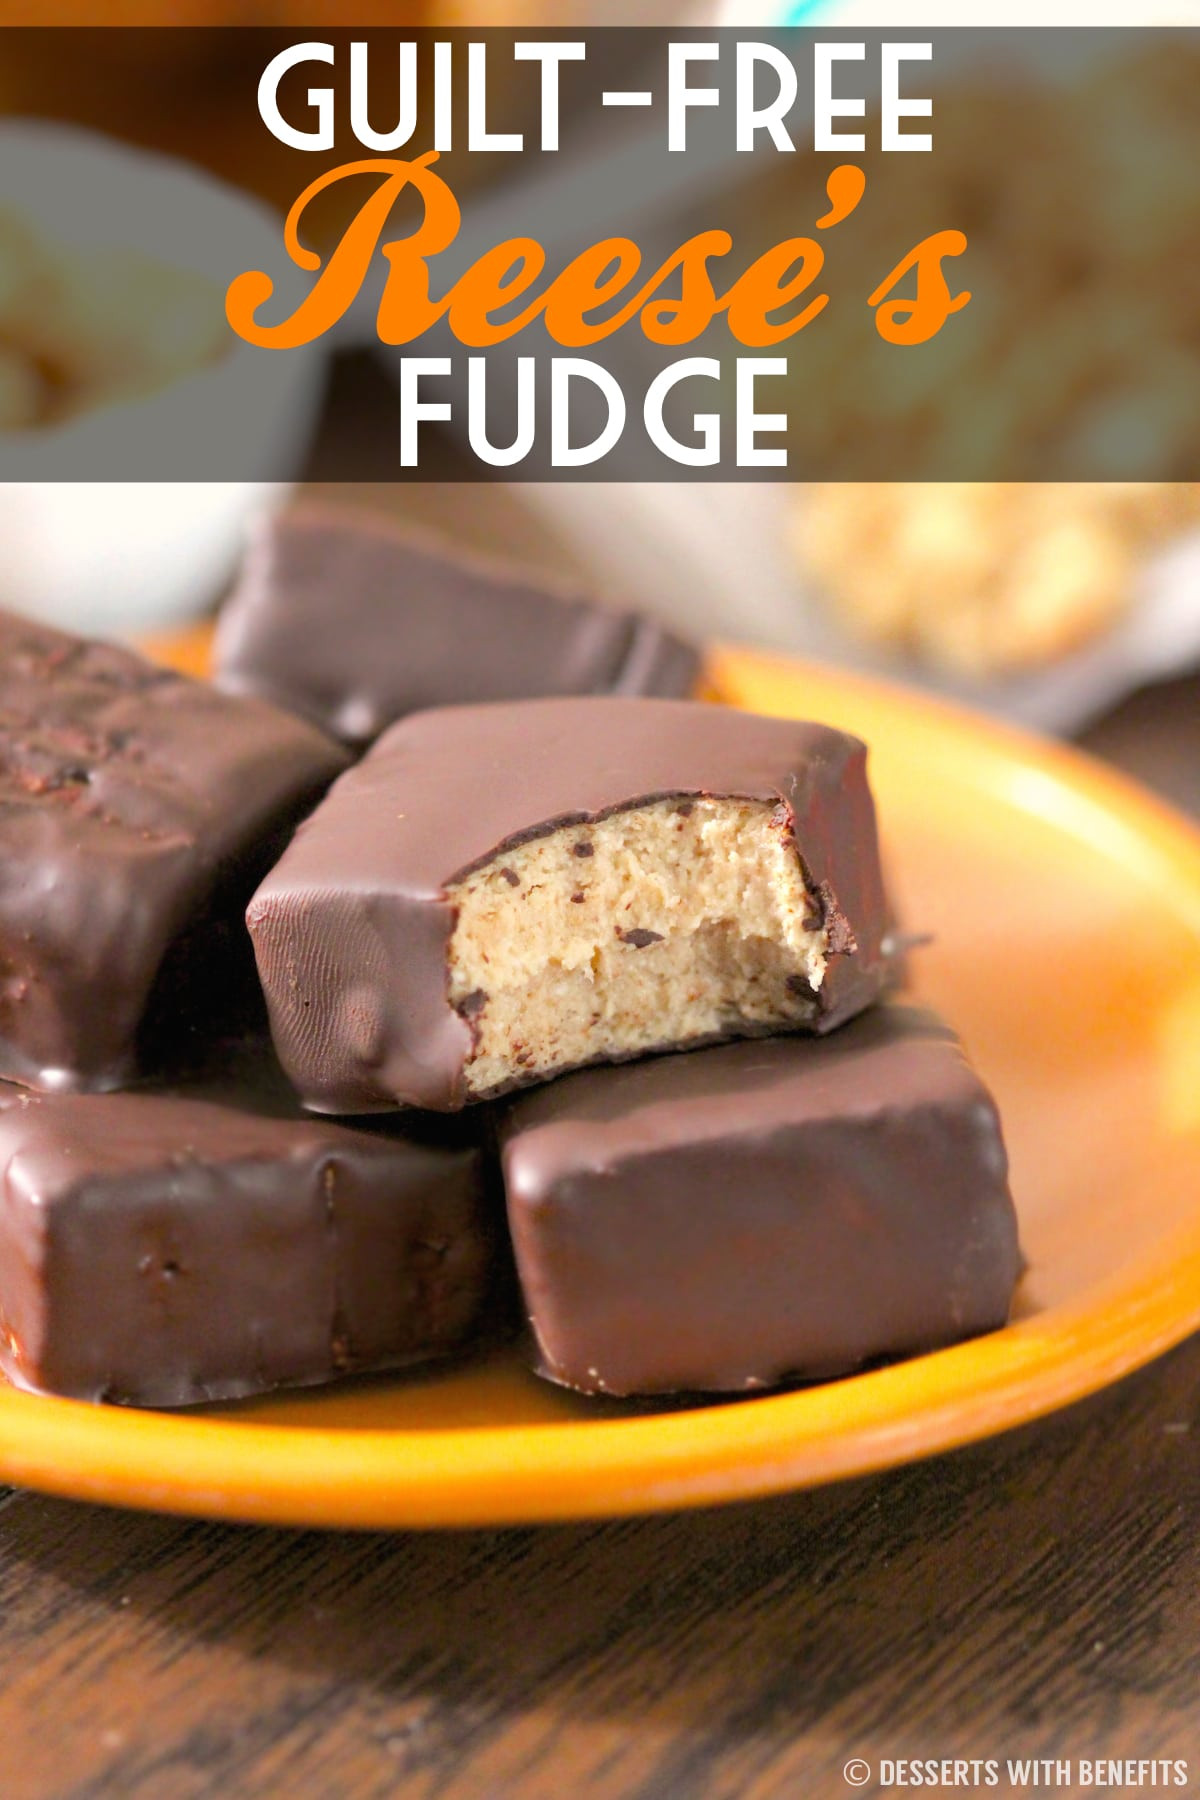 Low Calorie Chocolate Recipes
 Healthy Reese s Fudge Desserts with Benefits